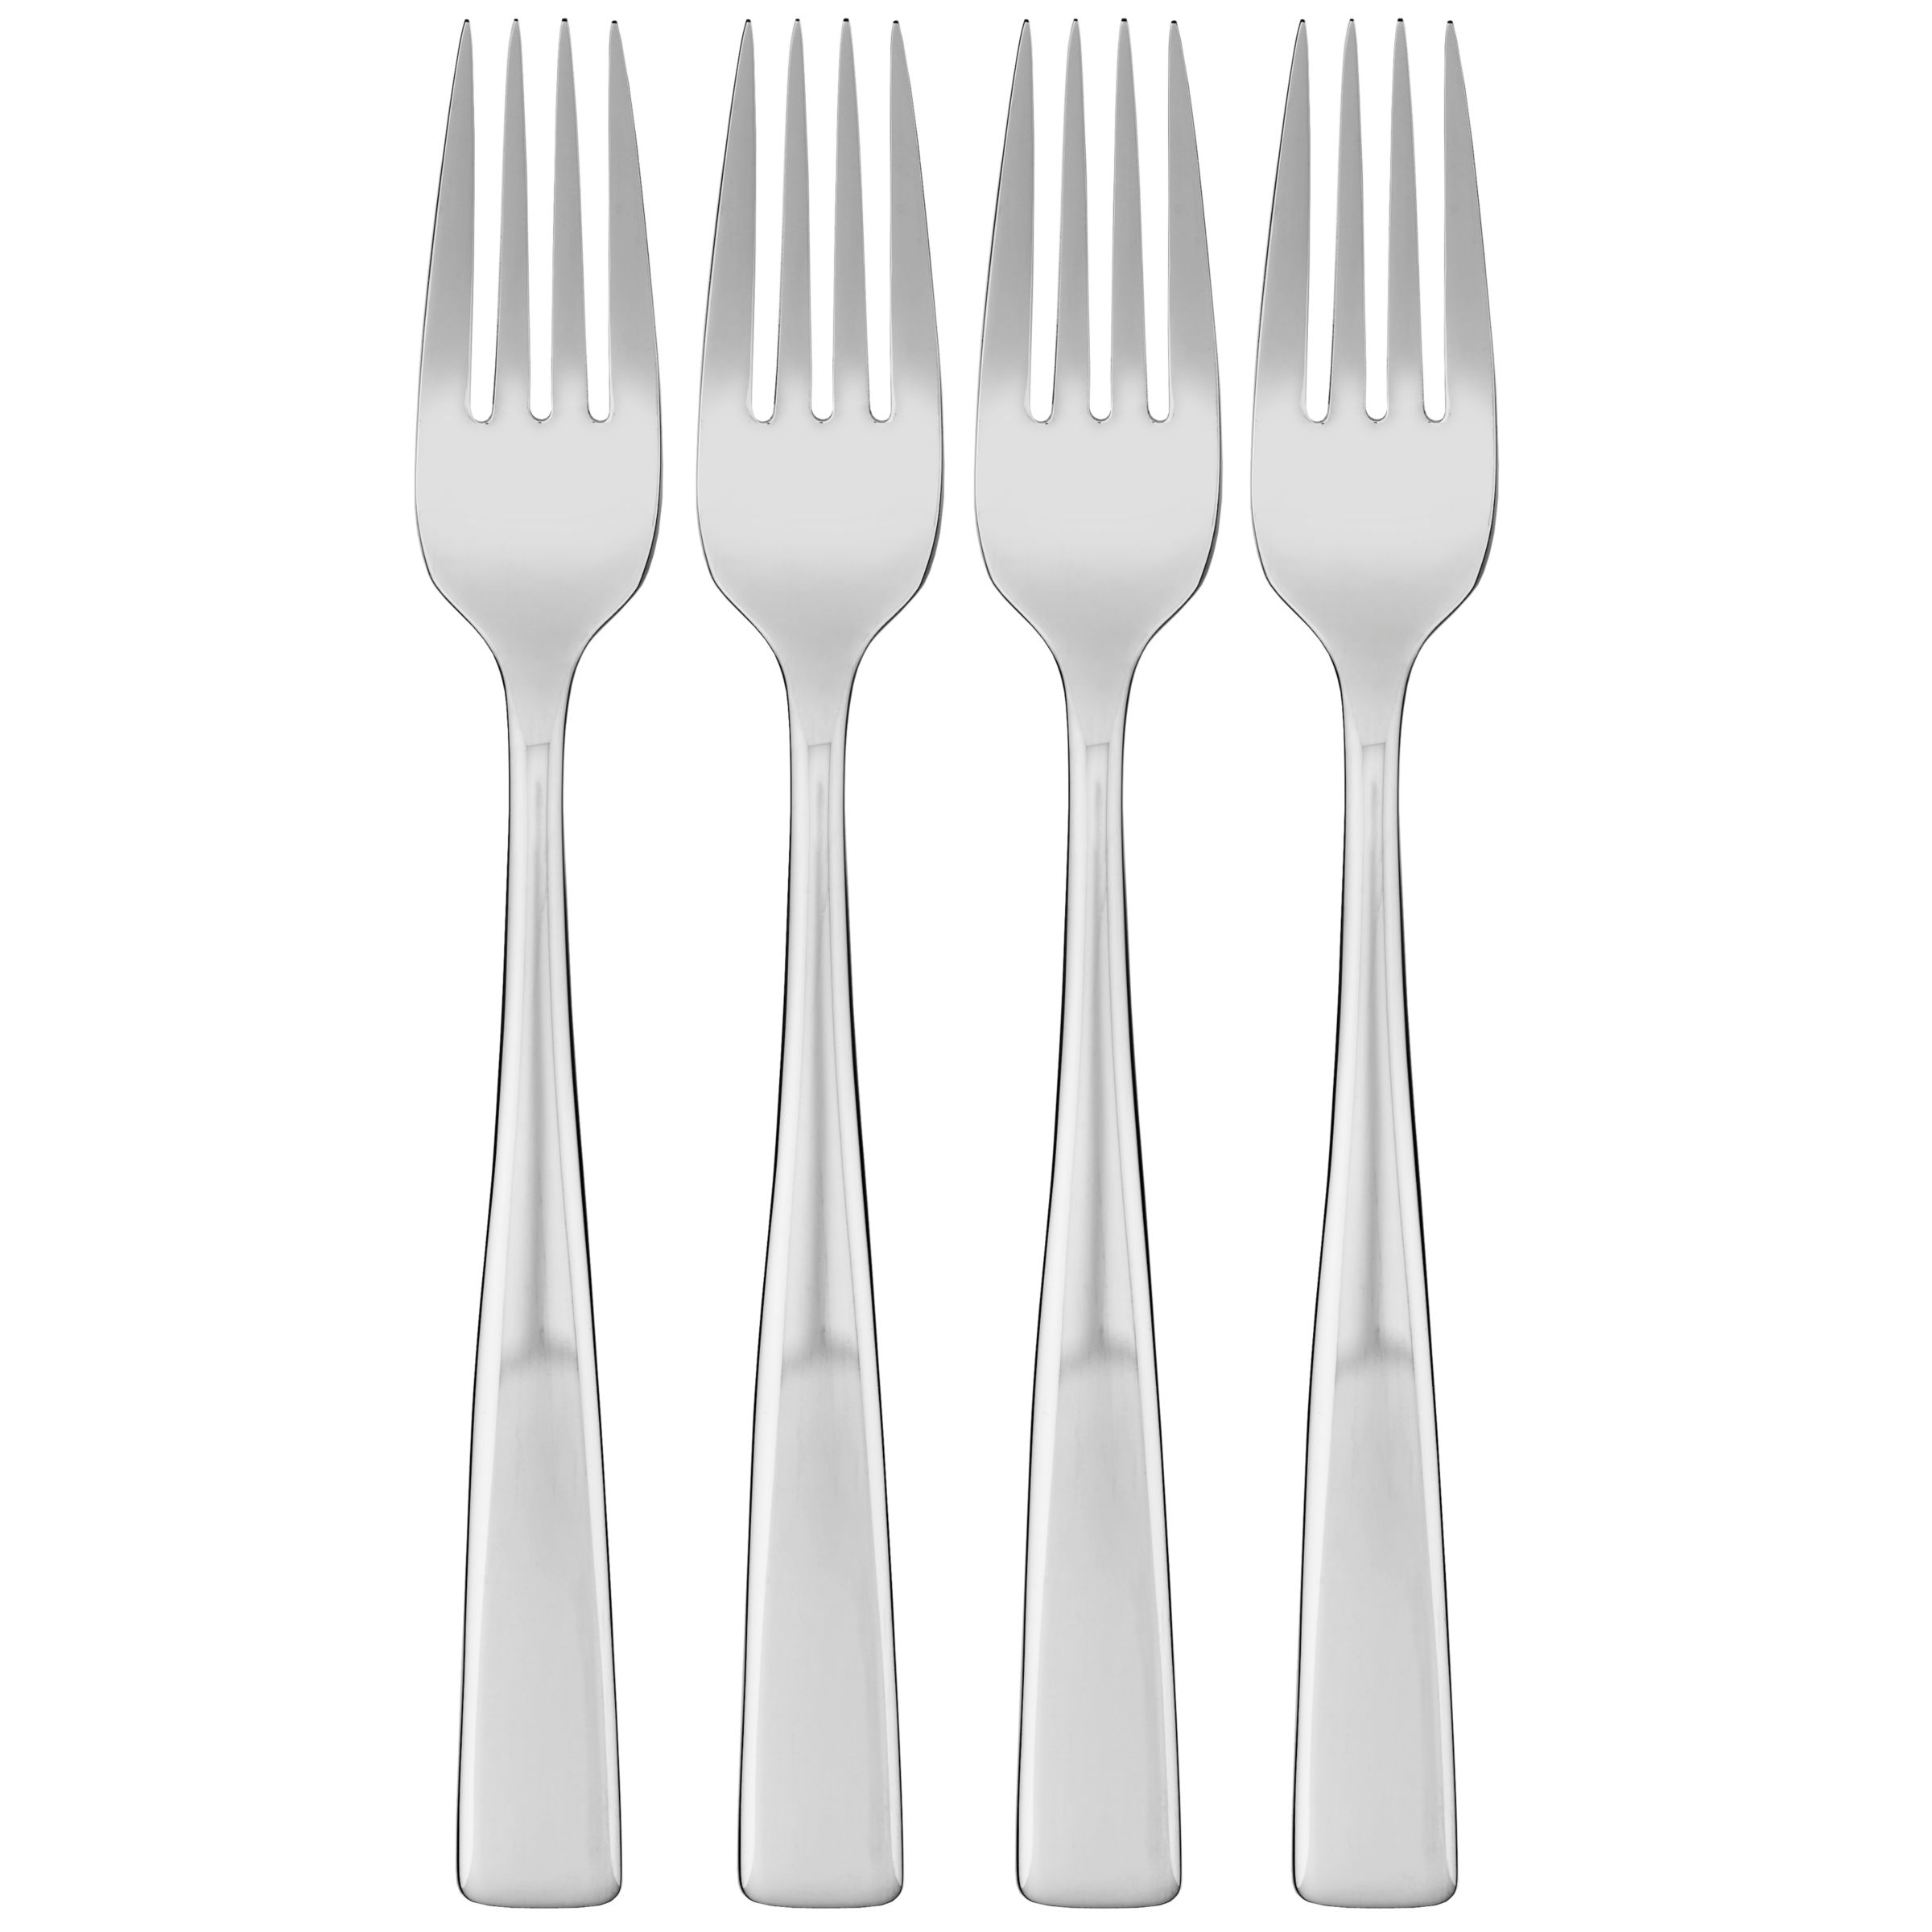 Edge Table Forks, Stainless Steel,